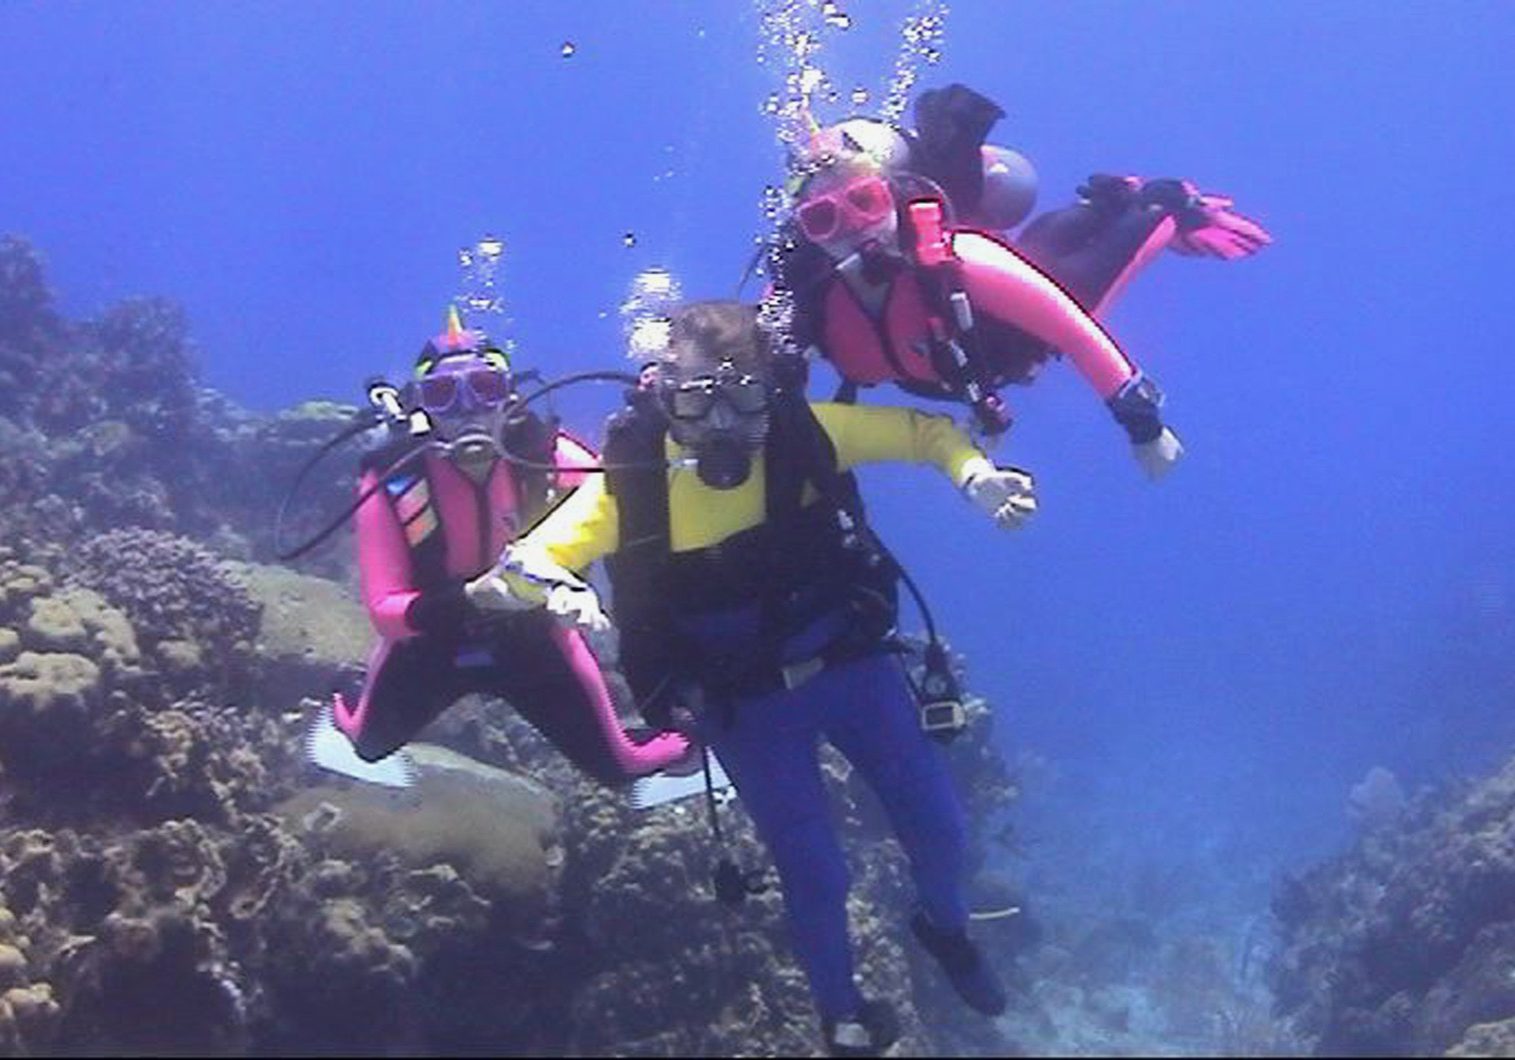 Gene in scuba gear with a dive buddy on either side of him in front of coral wall